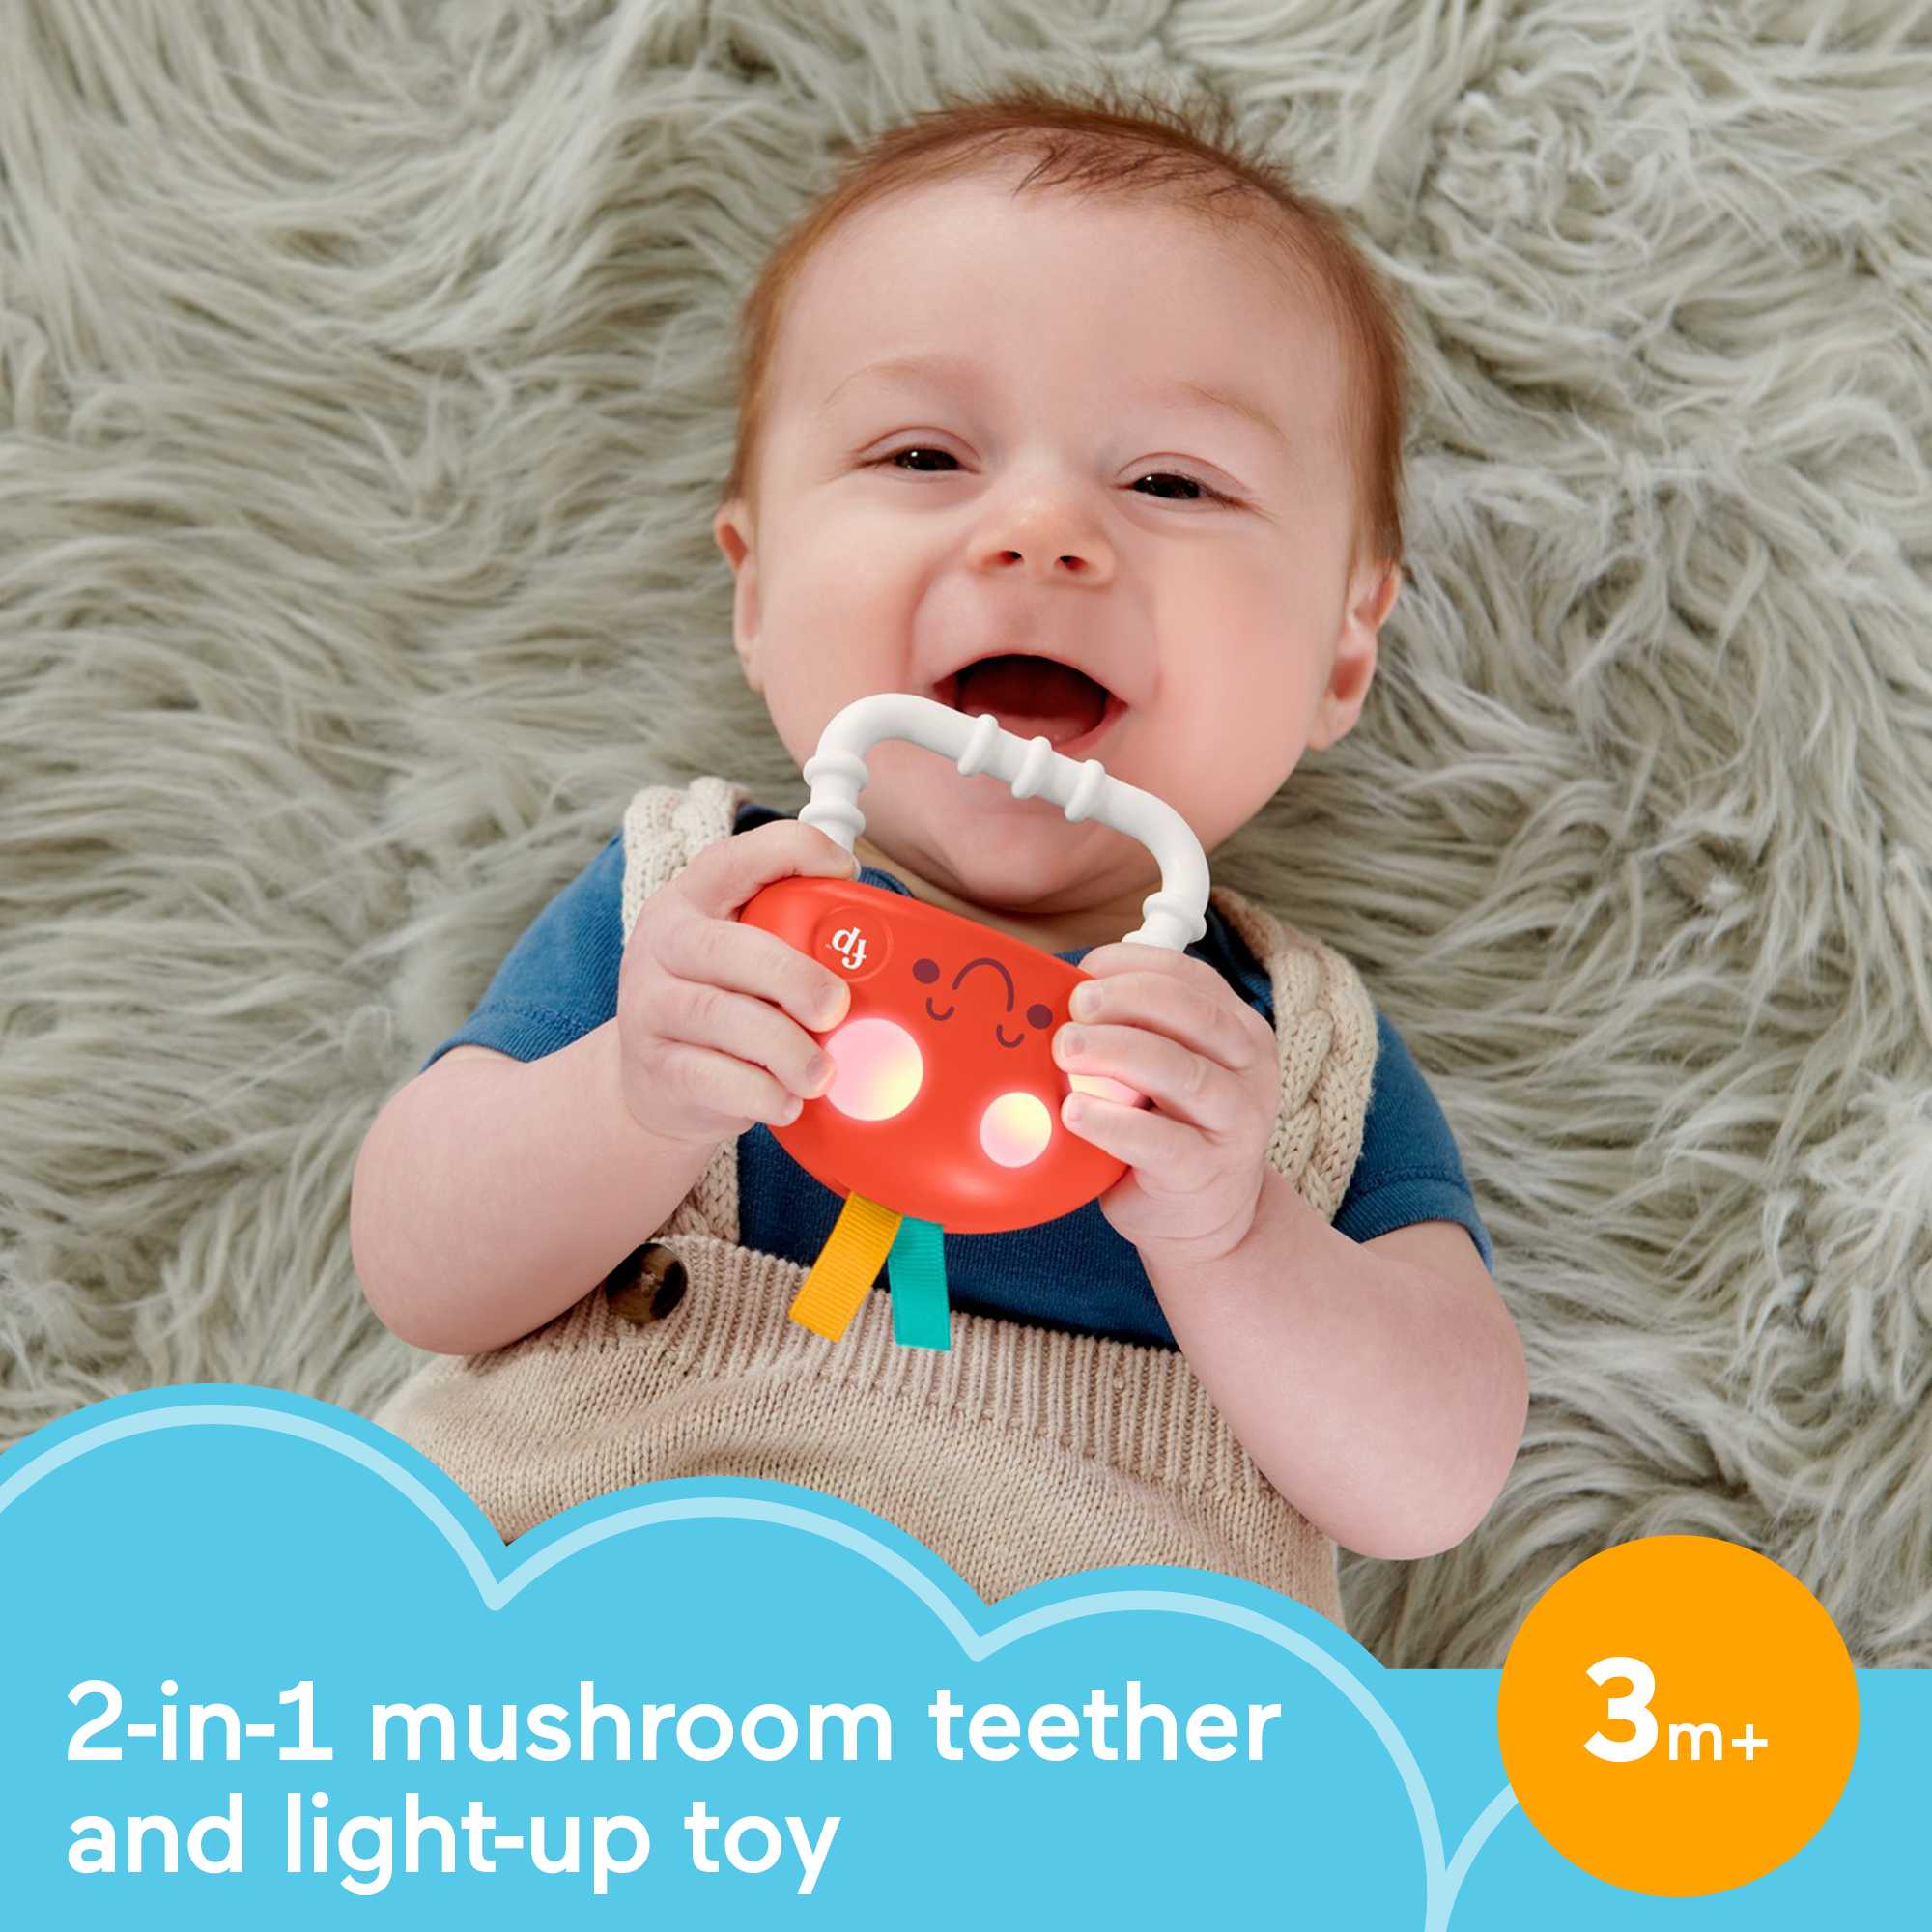 Mushroom Teether: The Ultimate Baby Soother